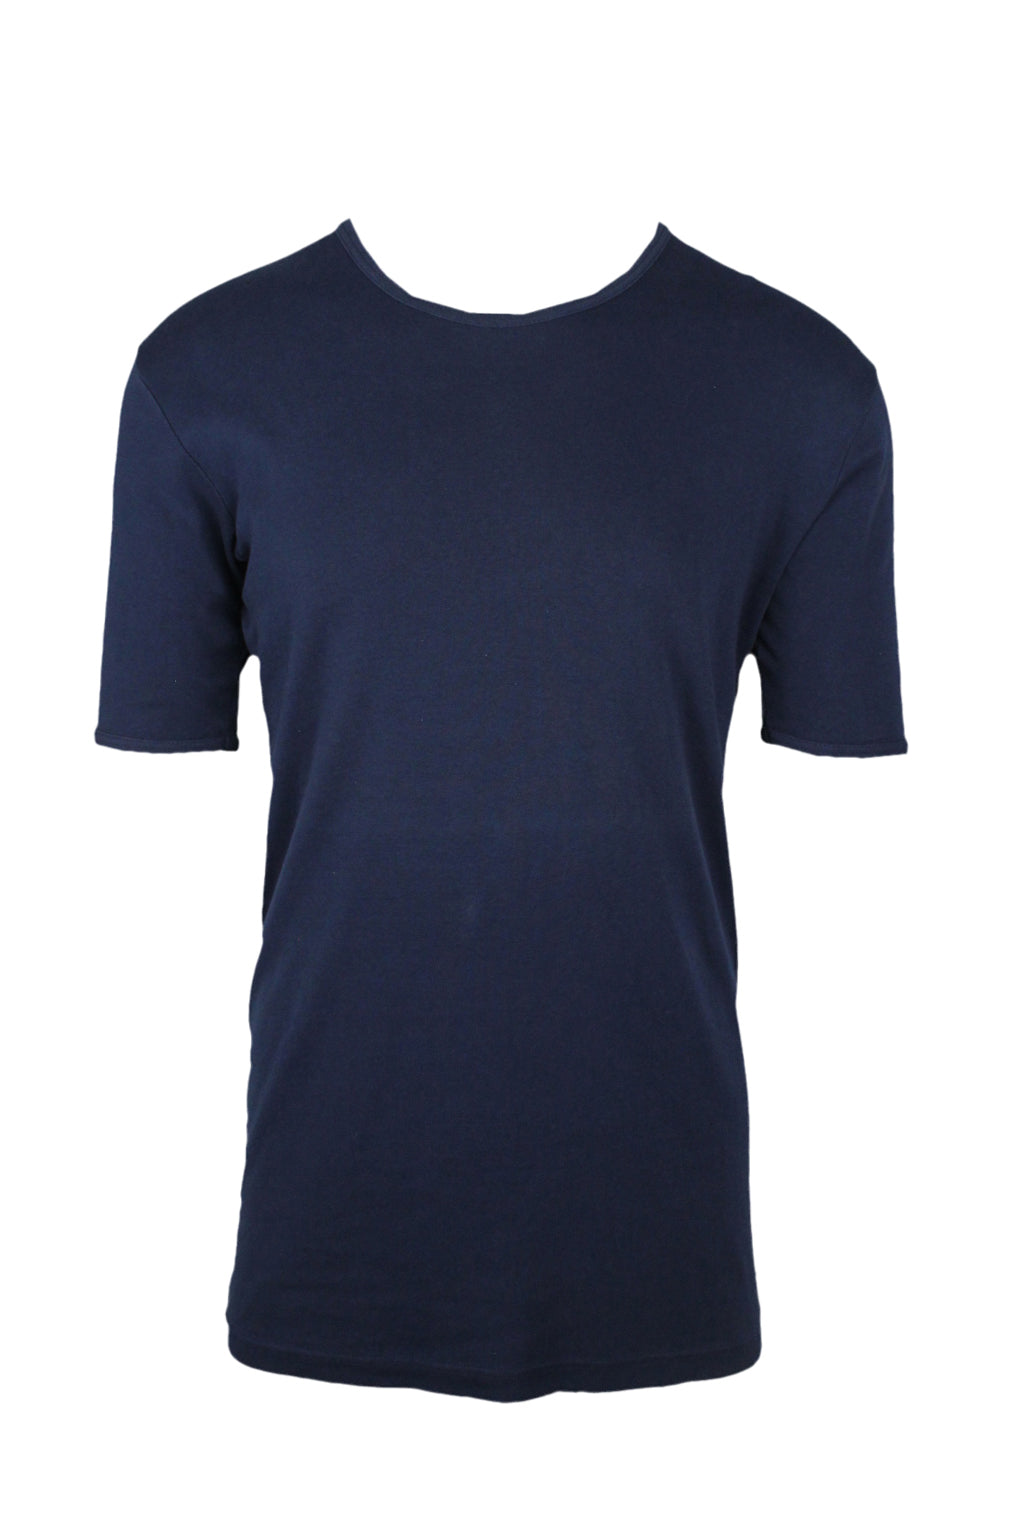 front view of comme des garcons navy cotton t-shirt. features ribbed collar/cuffs.